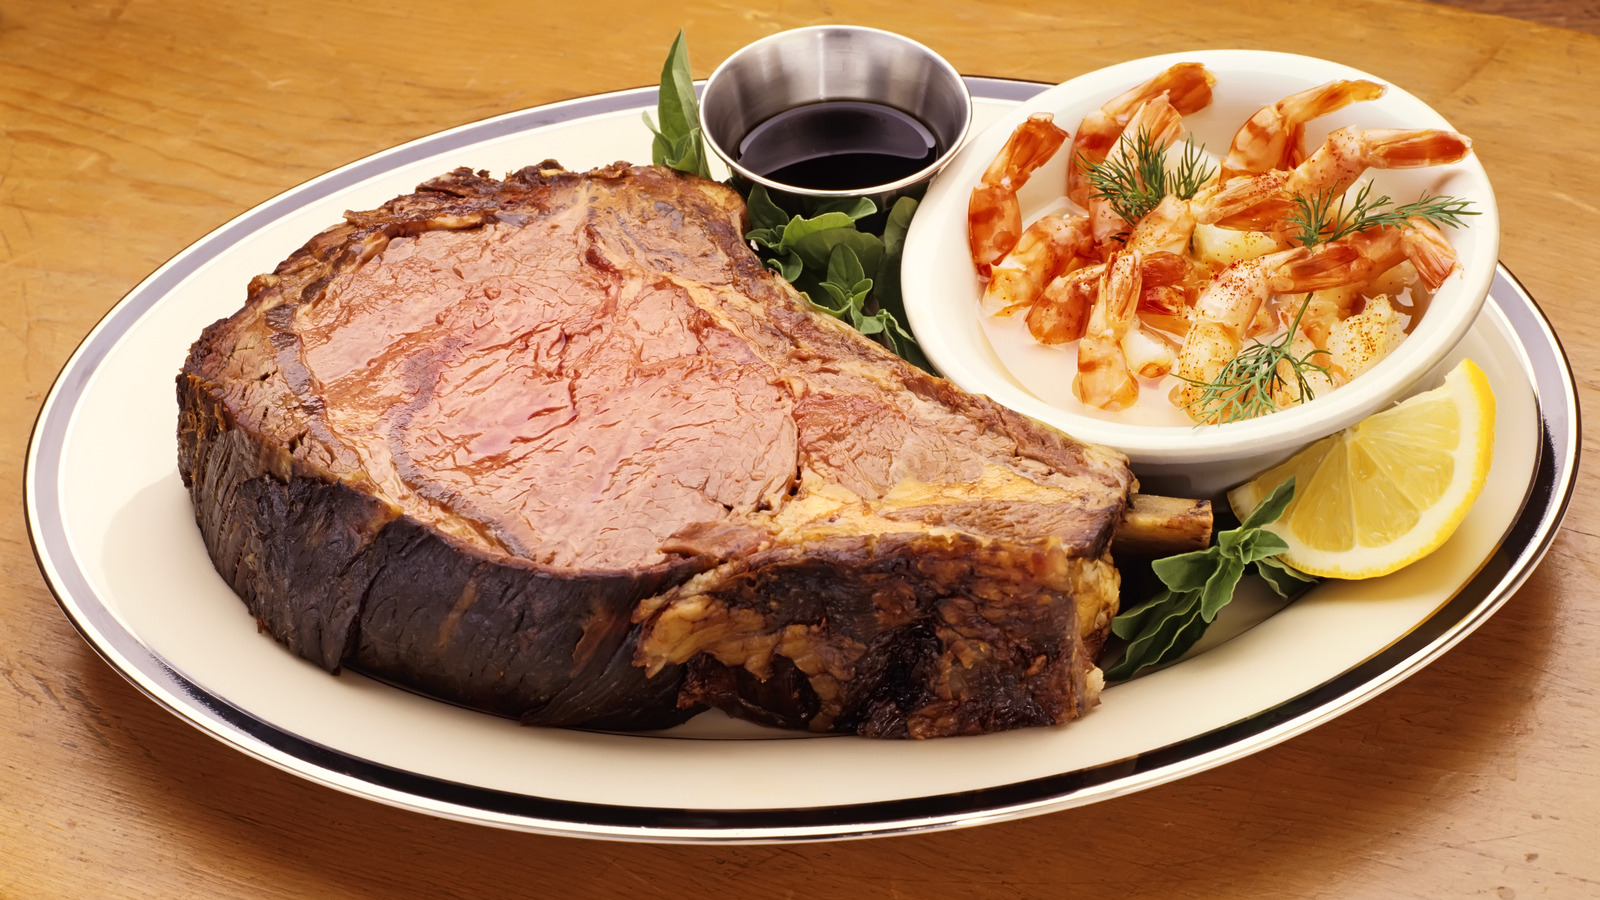 https://www.thedailymeal.com/img/gallery/the-shopping-tip-to-keep-in-your-back-pocket-when-buying-prime-rib/l-intro-1703697383.jpg